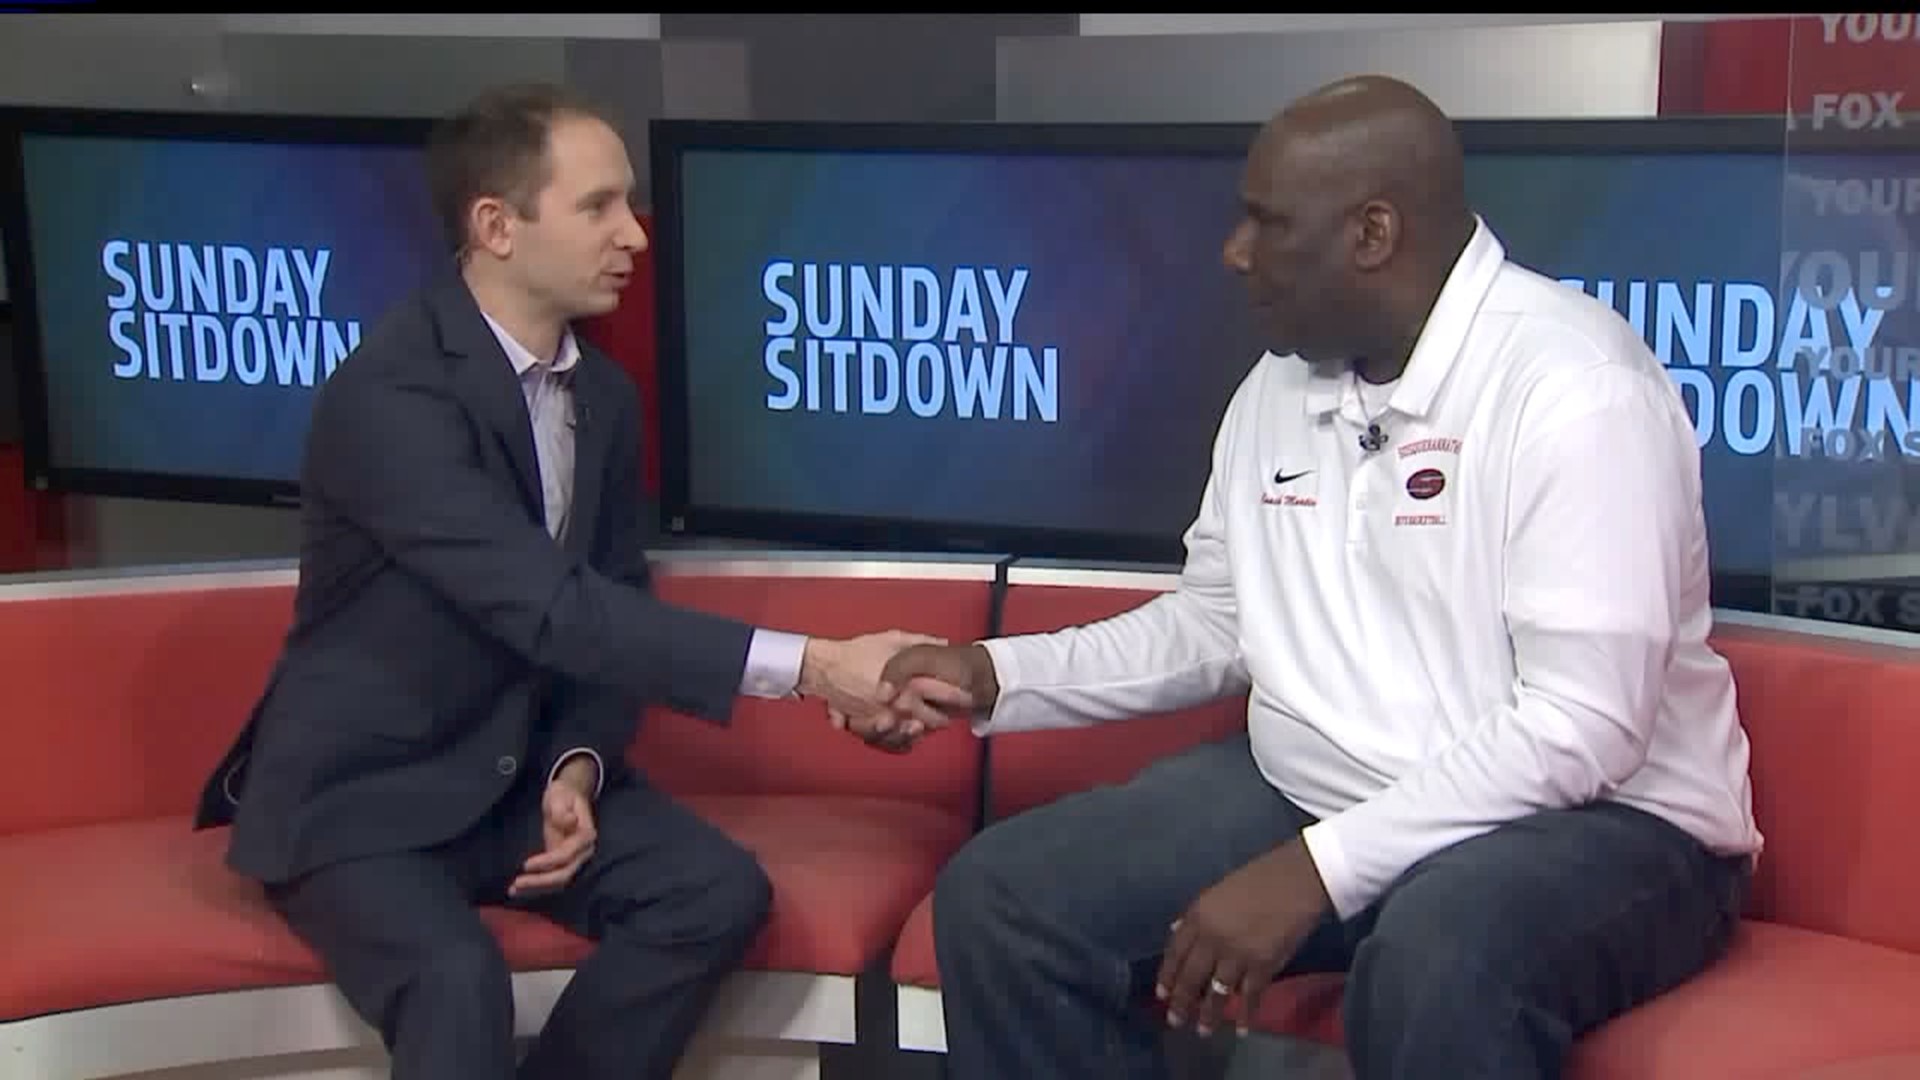 Gary Martin stops by the Sunday Sitdown to talk all things high school basketball as the state playoffs are underway.